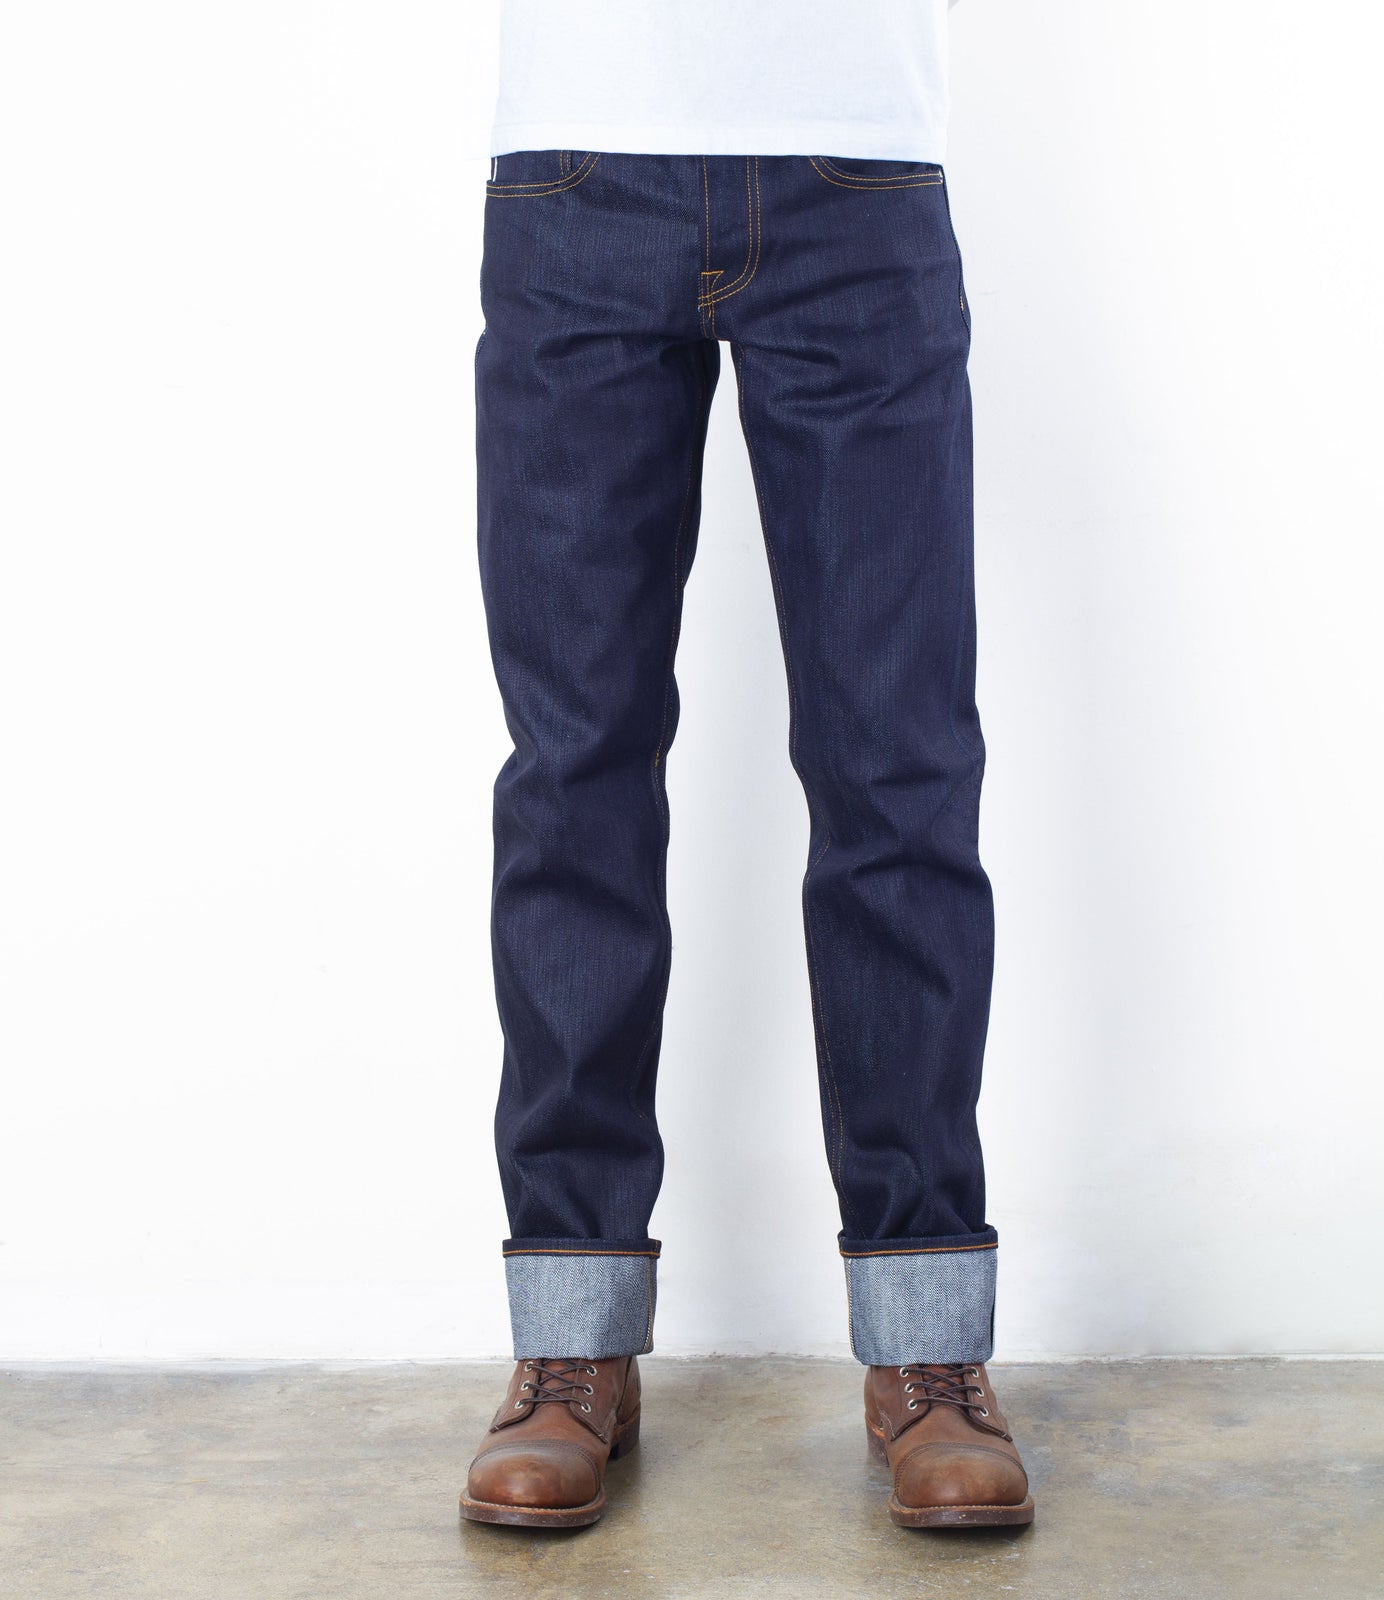 NEW ARRIVALS - Brave Star Selvage